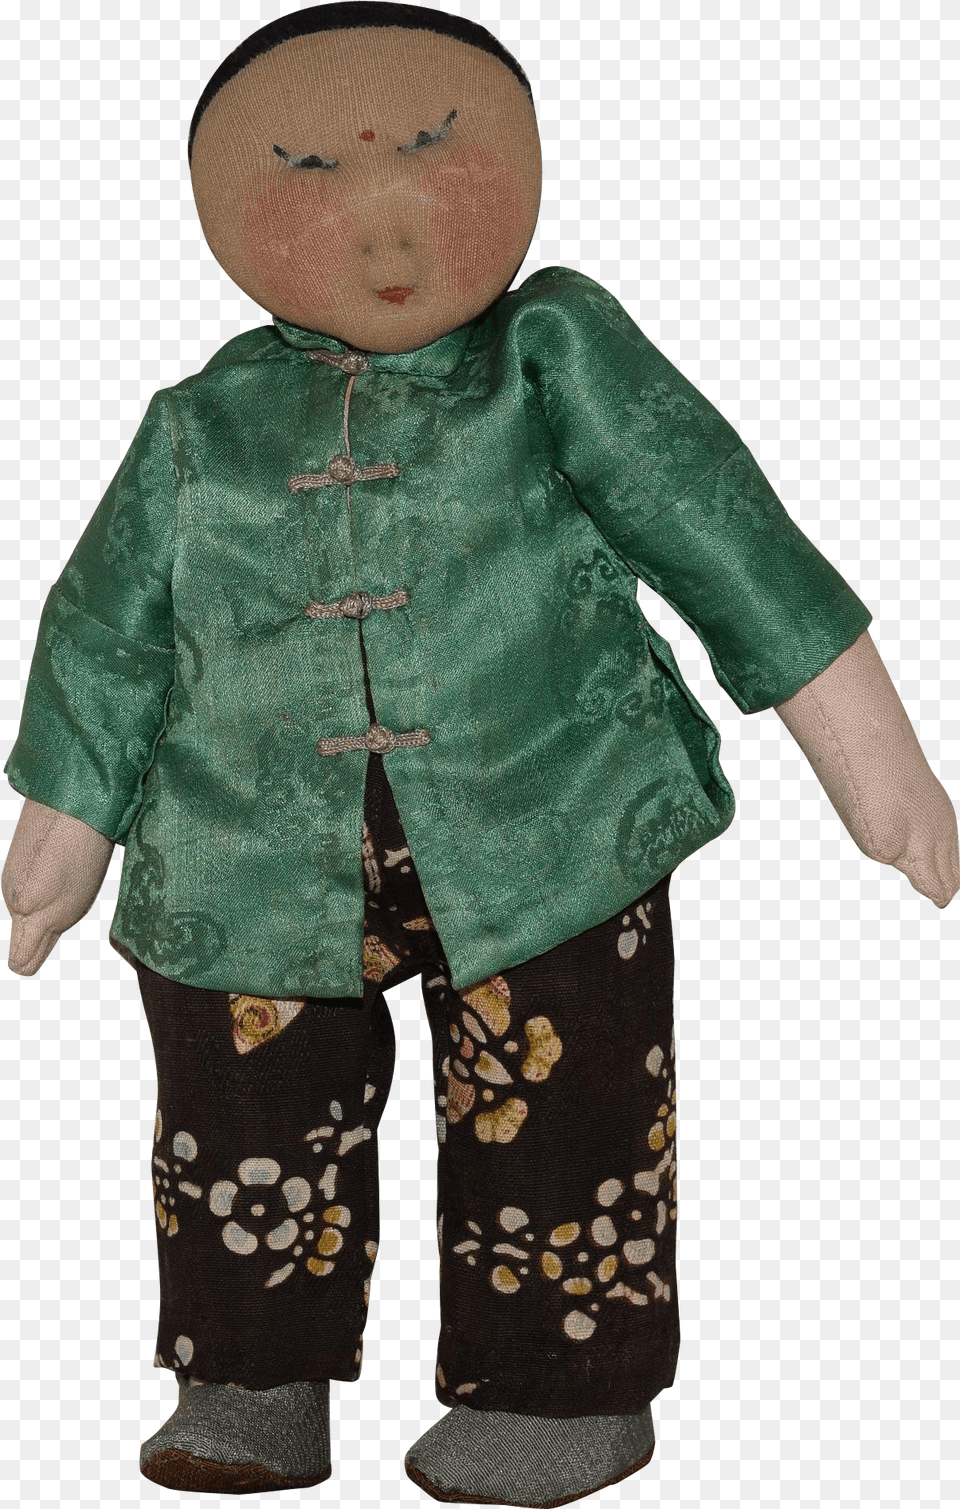 Vintage Cloth Chinese Doll With Needle Sculpted Face Doll, Toy, Person, Baby, Coat Png Image